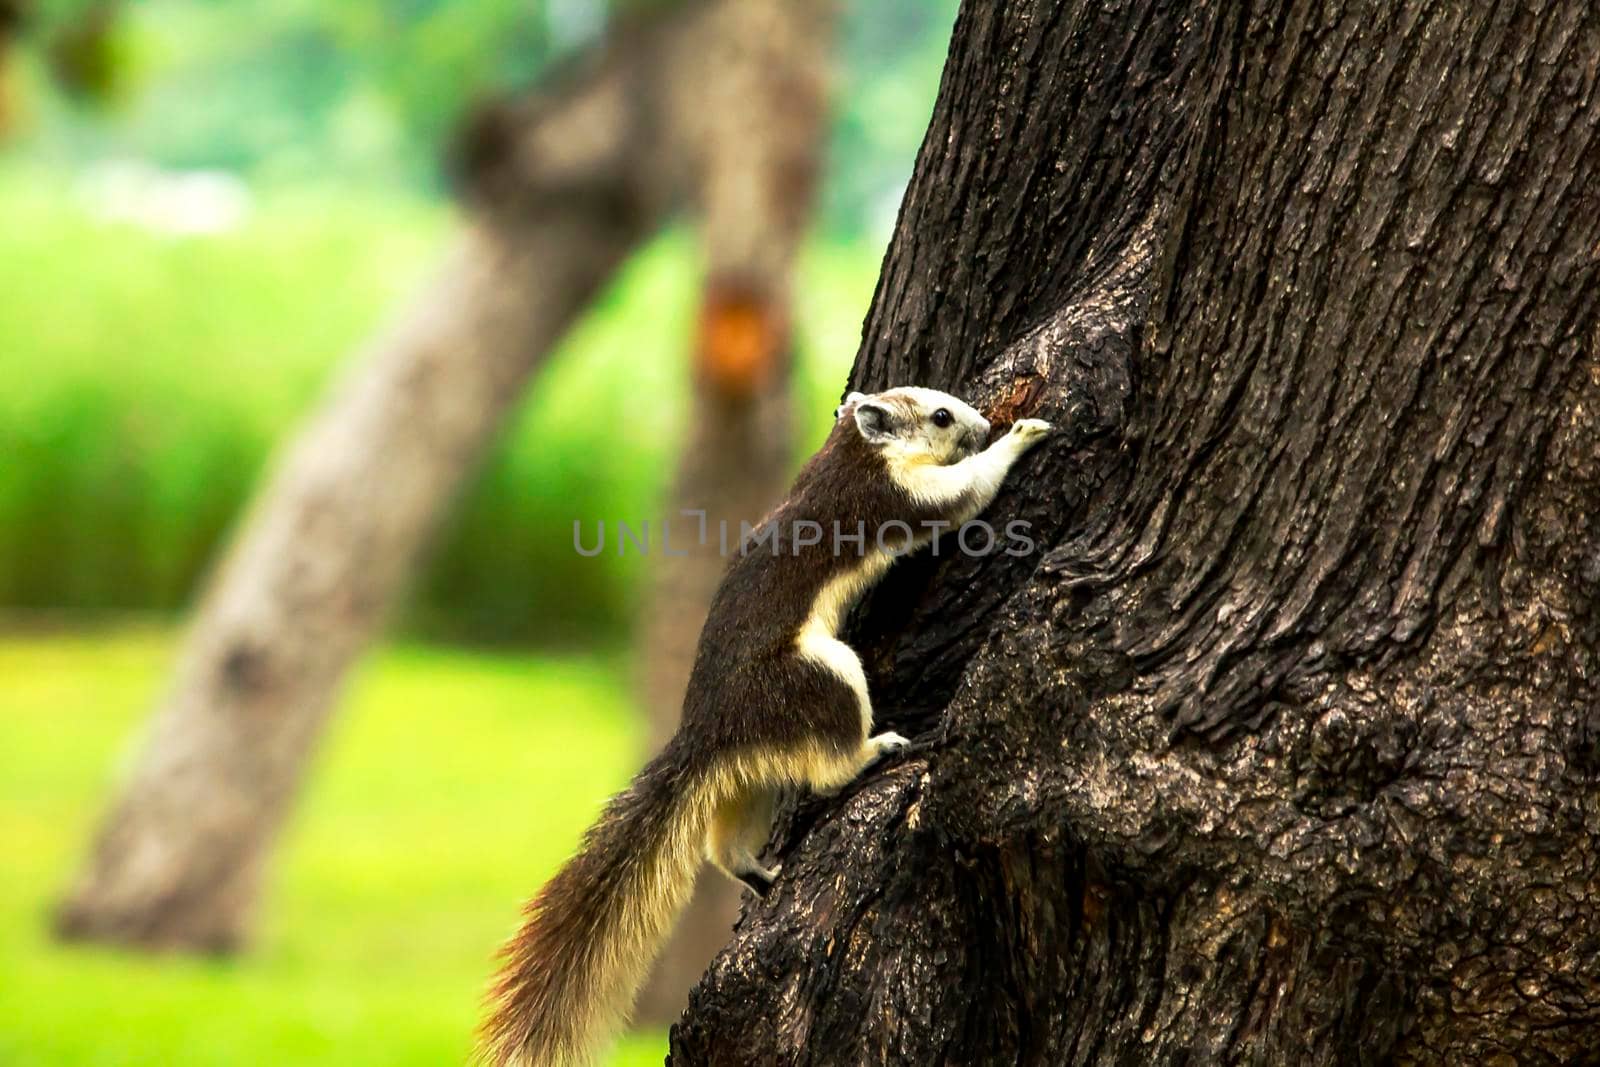 Variable squirrel a kind of squirrel That can be found everywhere in the Indochina region to Singapore. There is a great variety of colors. It is usually white and creamy to light yellow. until red or black all over or some may have multiple colors in the same